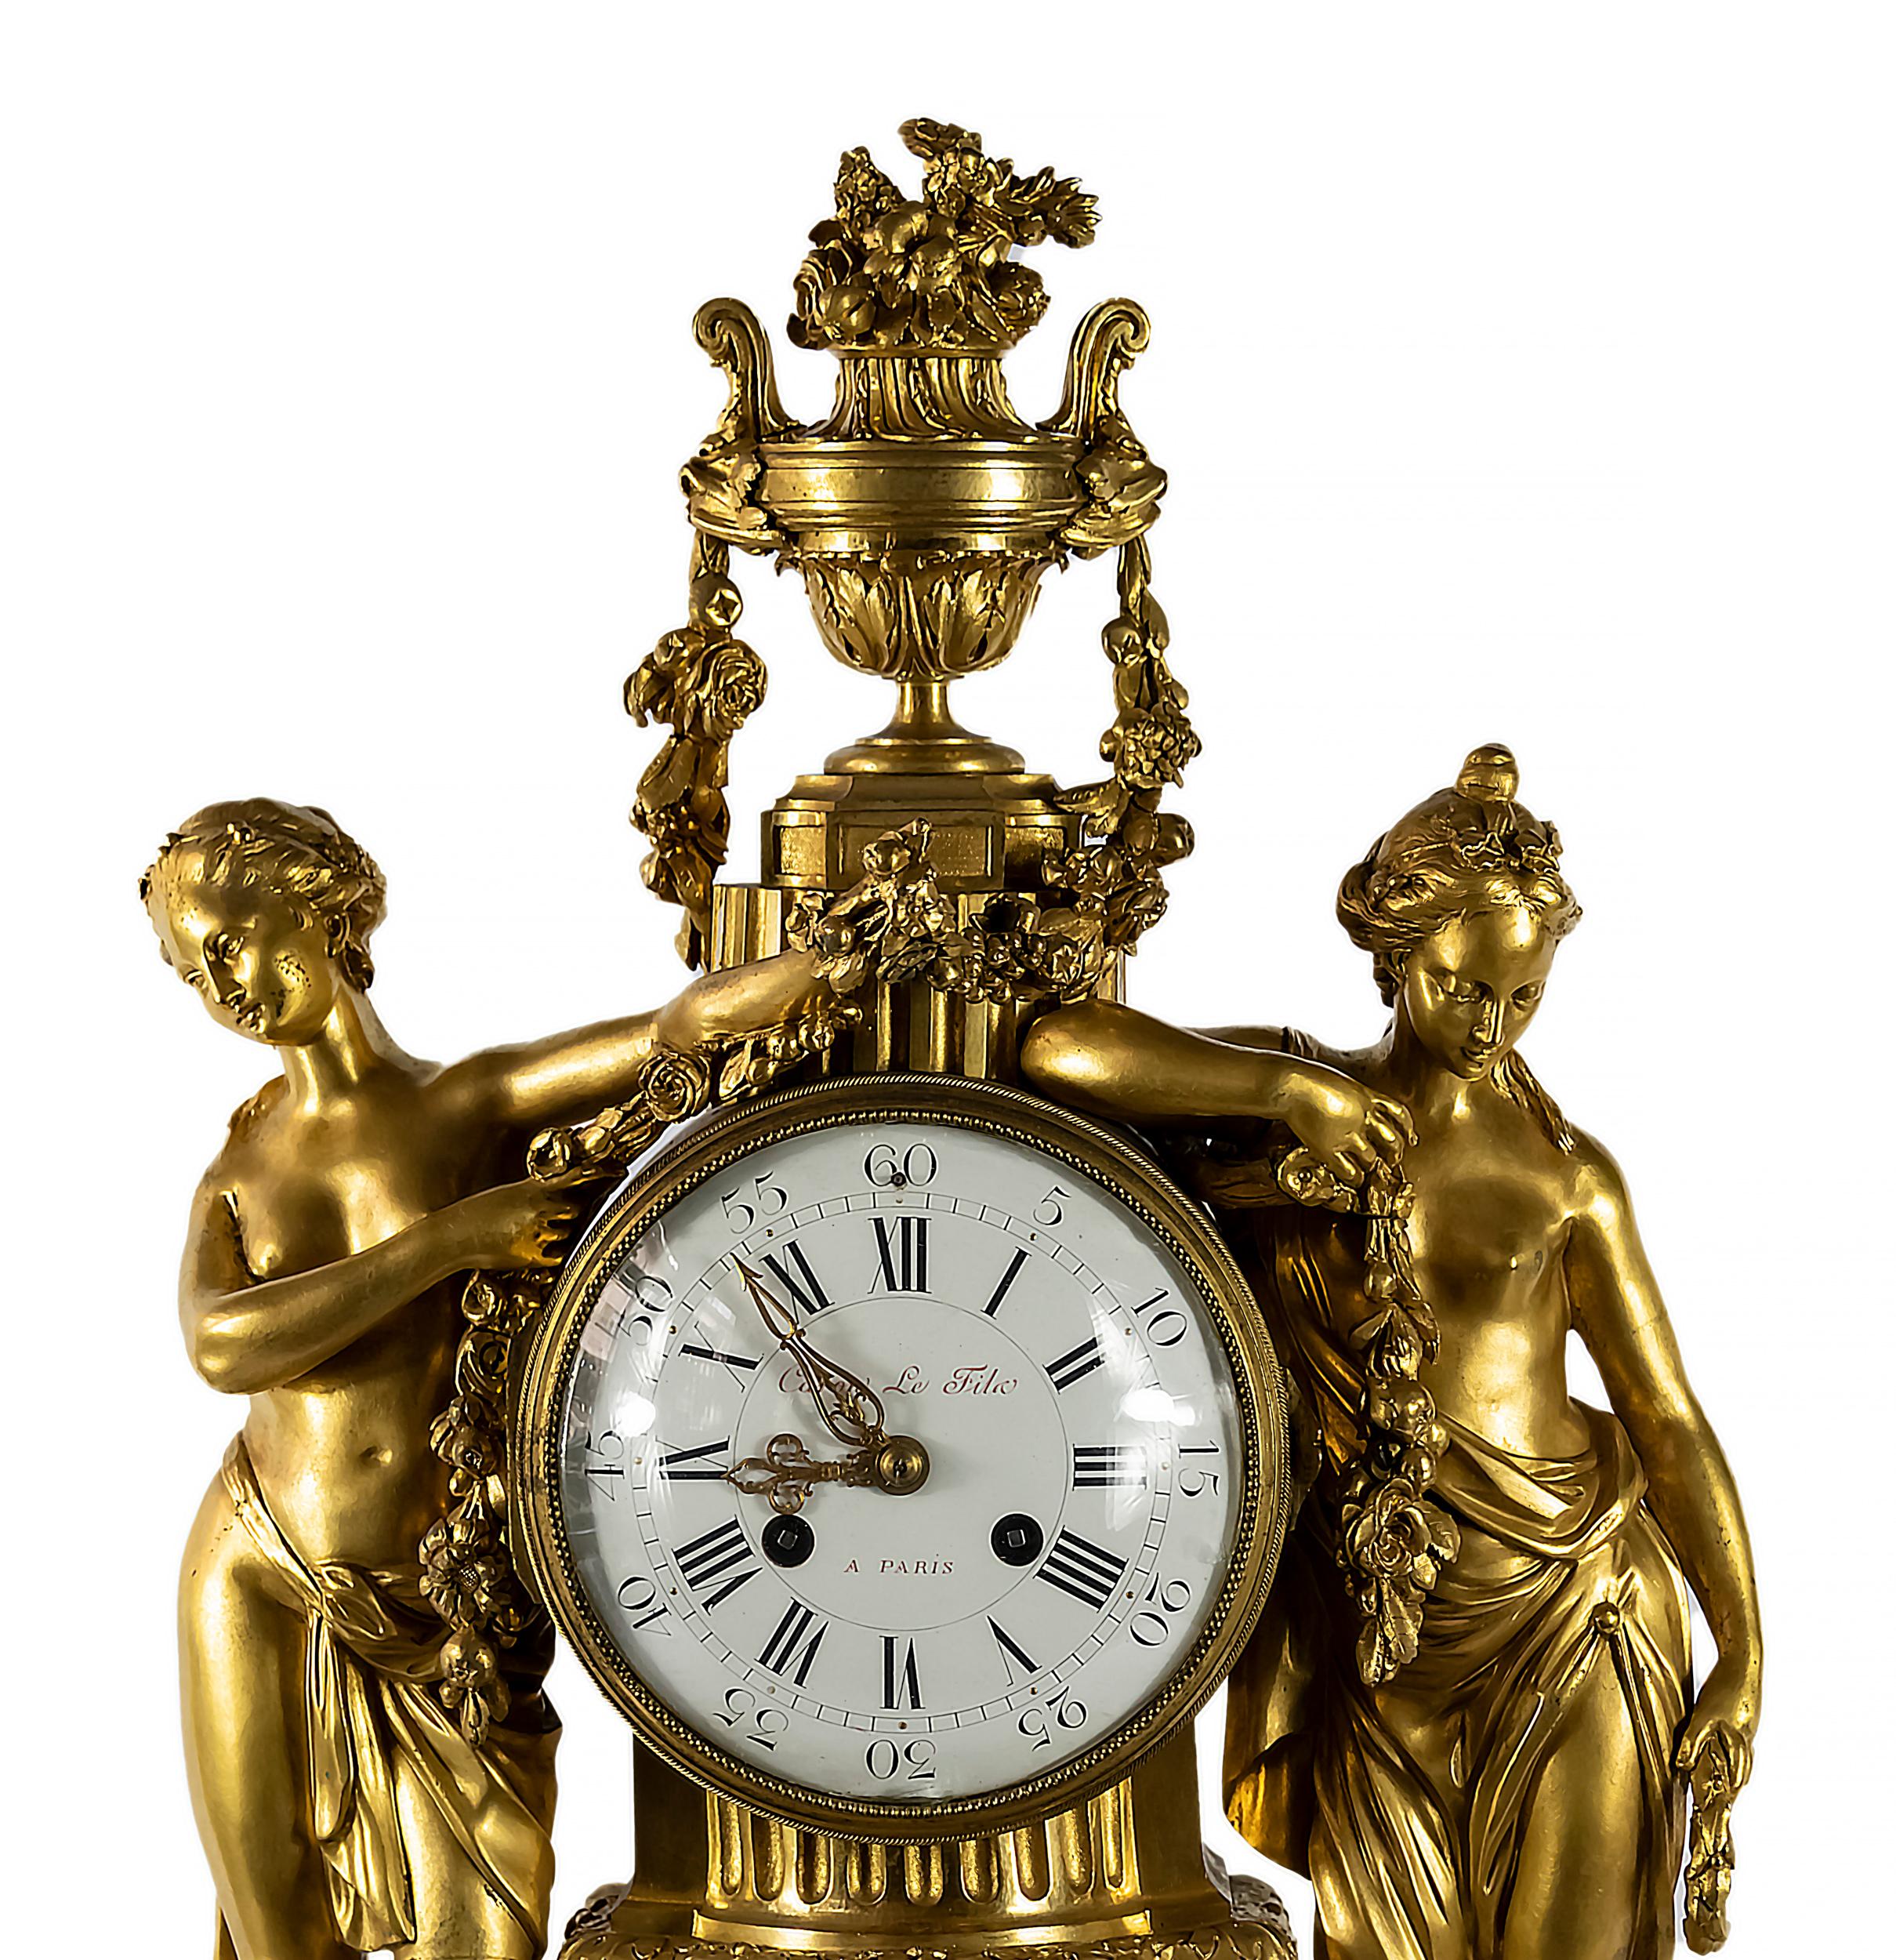 Antique 19th century French gilded bronze and white marble mantel clock. 
The clock is decorated with beautiful female figures holding floral garlands and vase with flowers on the top. 
White enamel dial plaque is marked Caron Le Fils A Paris and